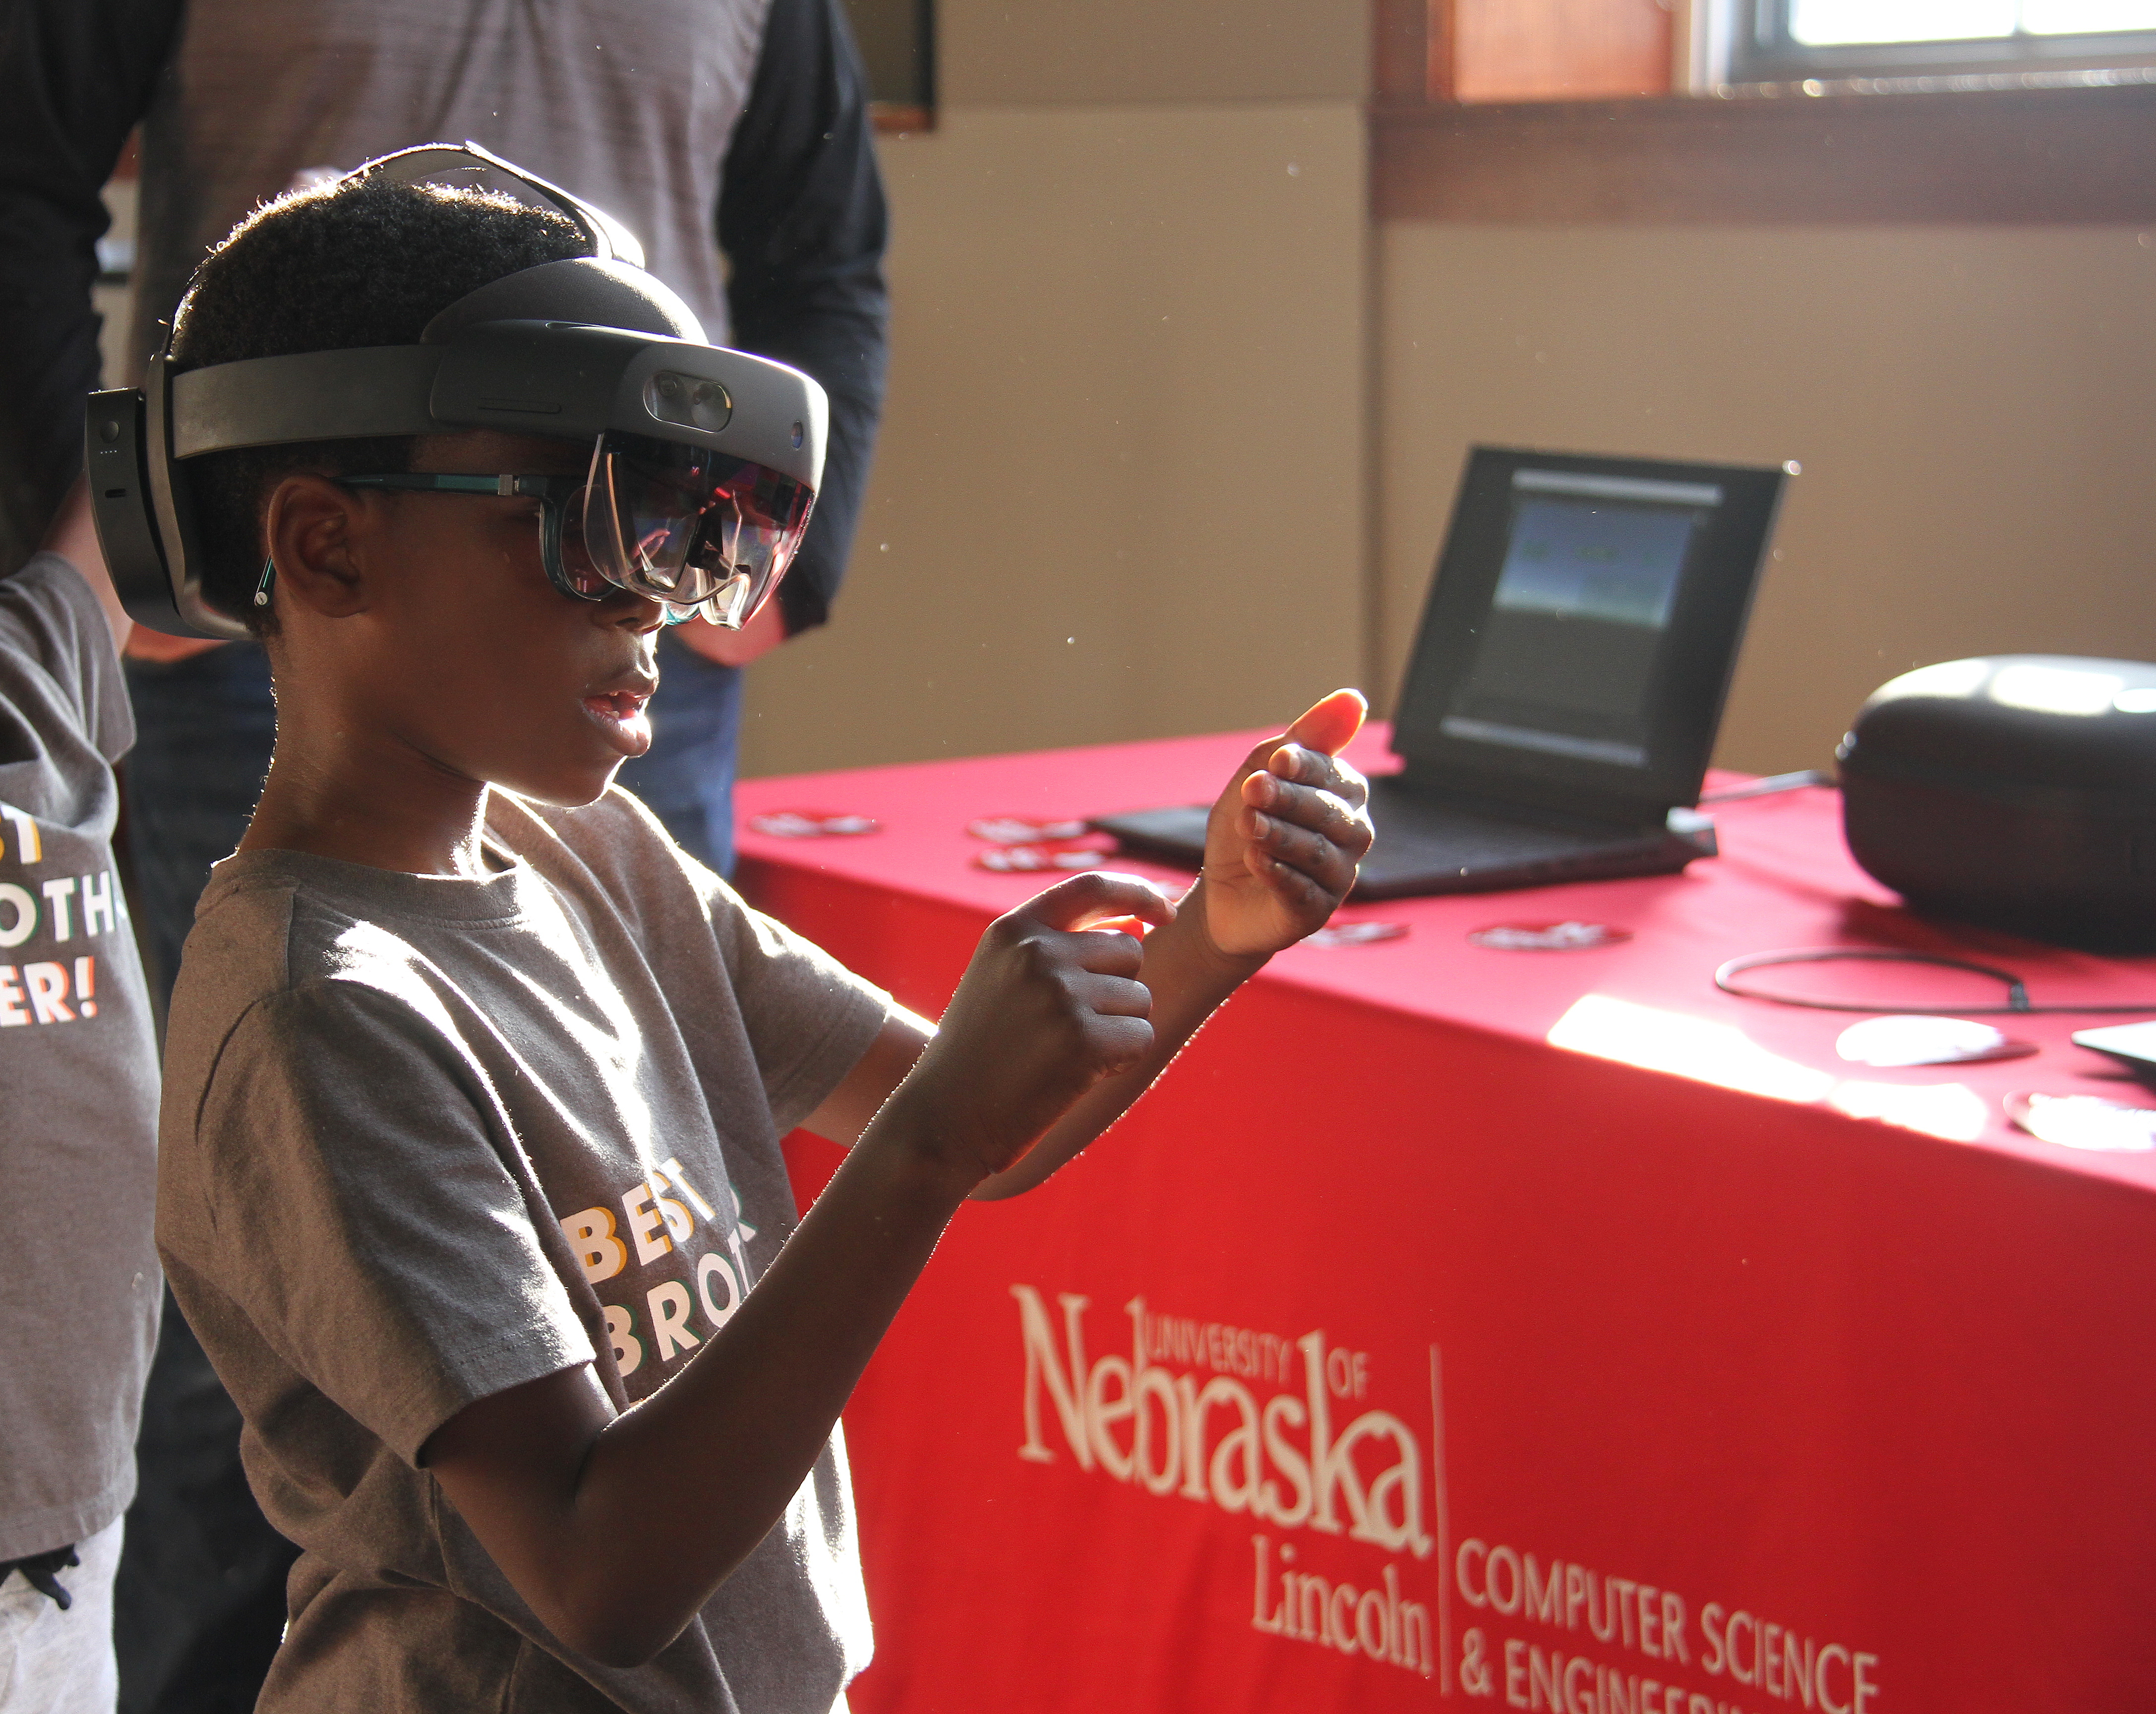 CodeLNK hosted its annual Hour of Code event this past Saturday at Nebraska Innovation Campus with more than 600 participants in attendance.